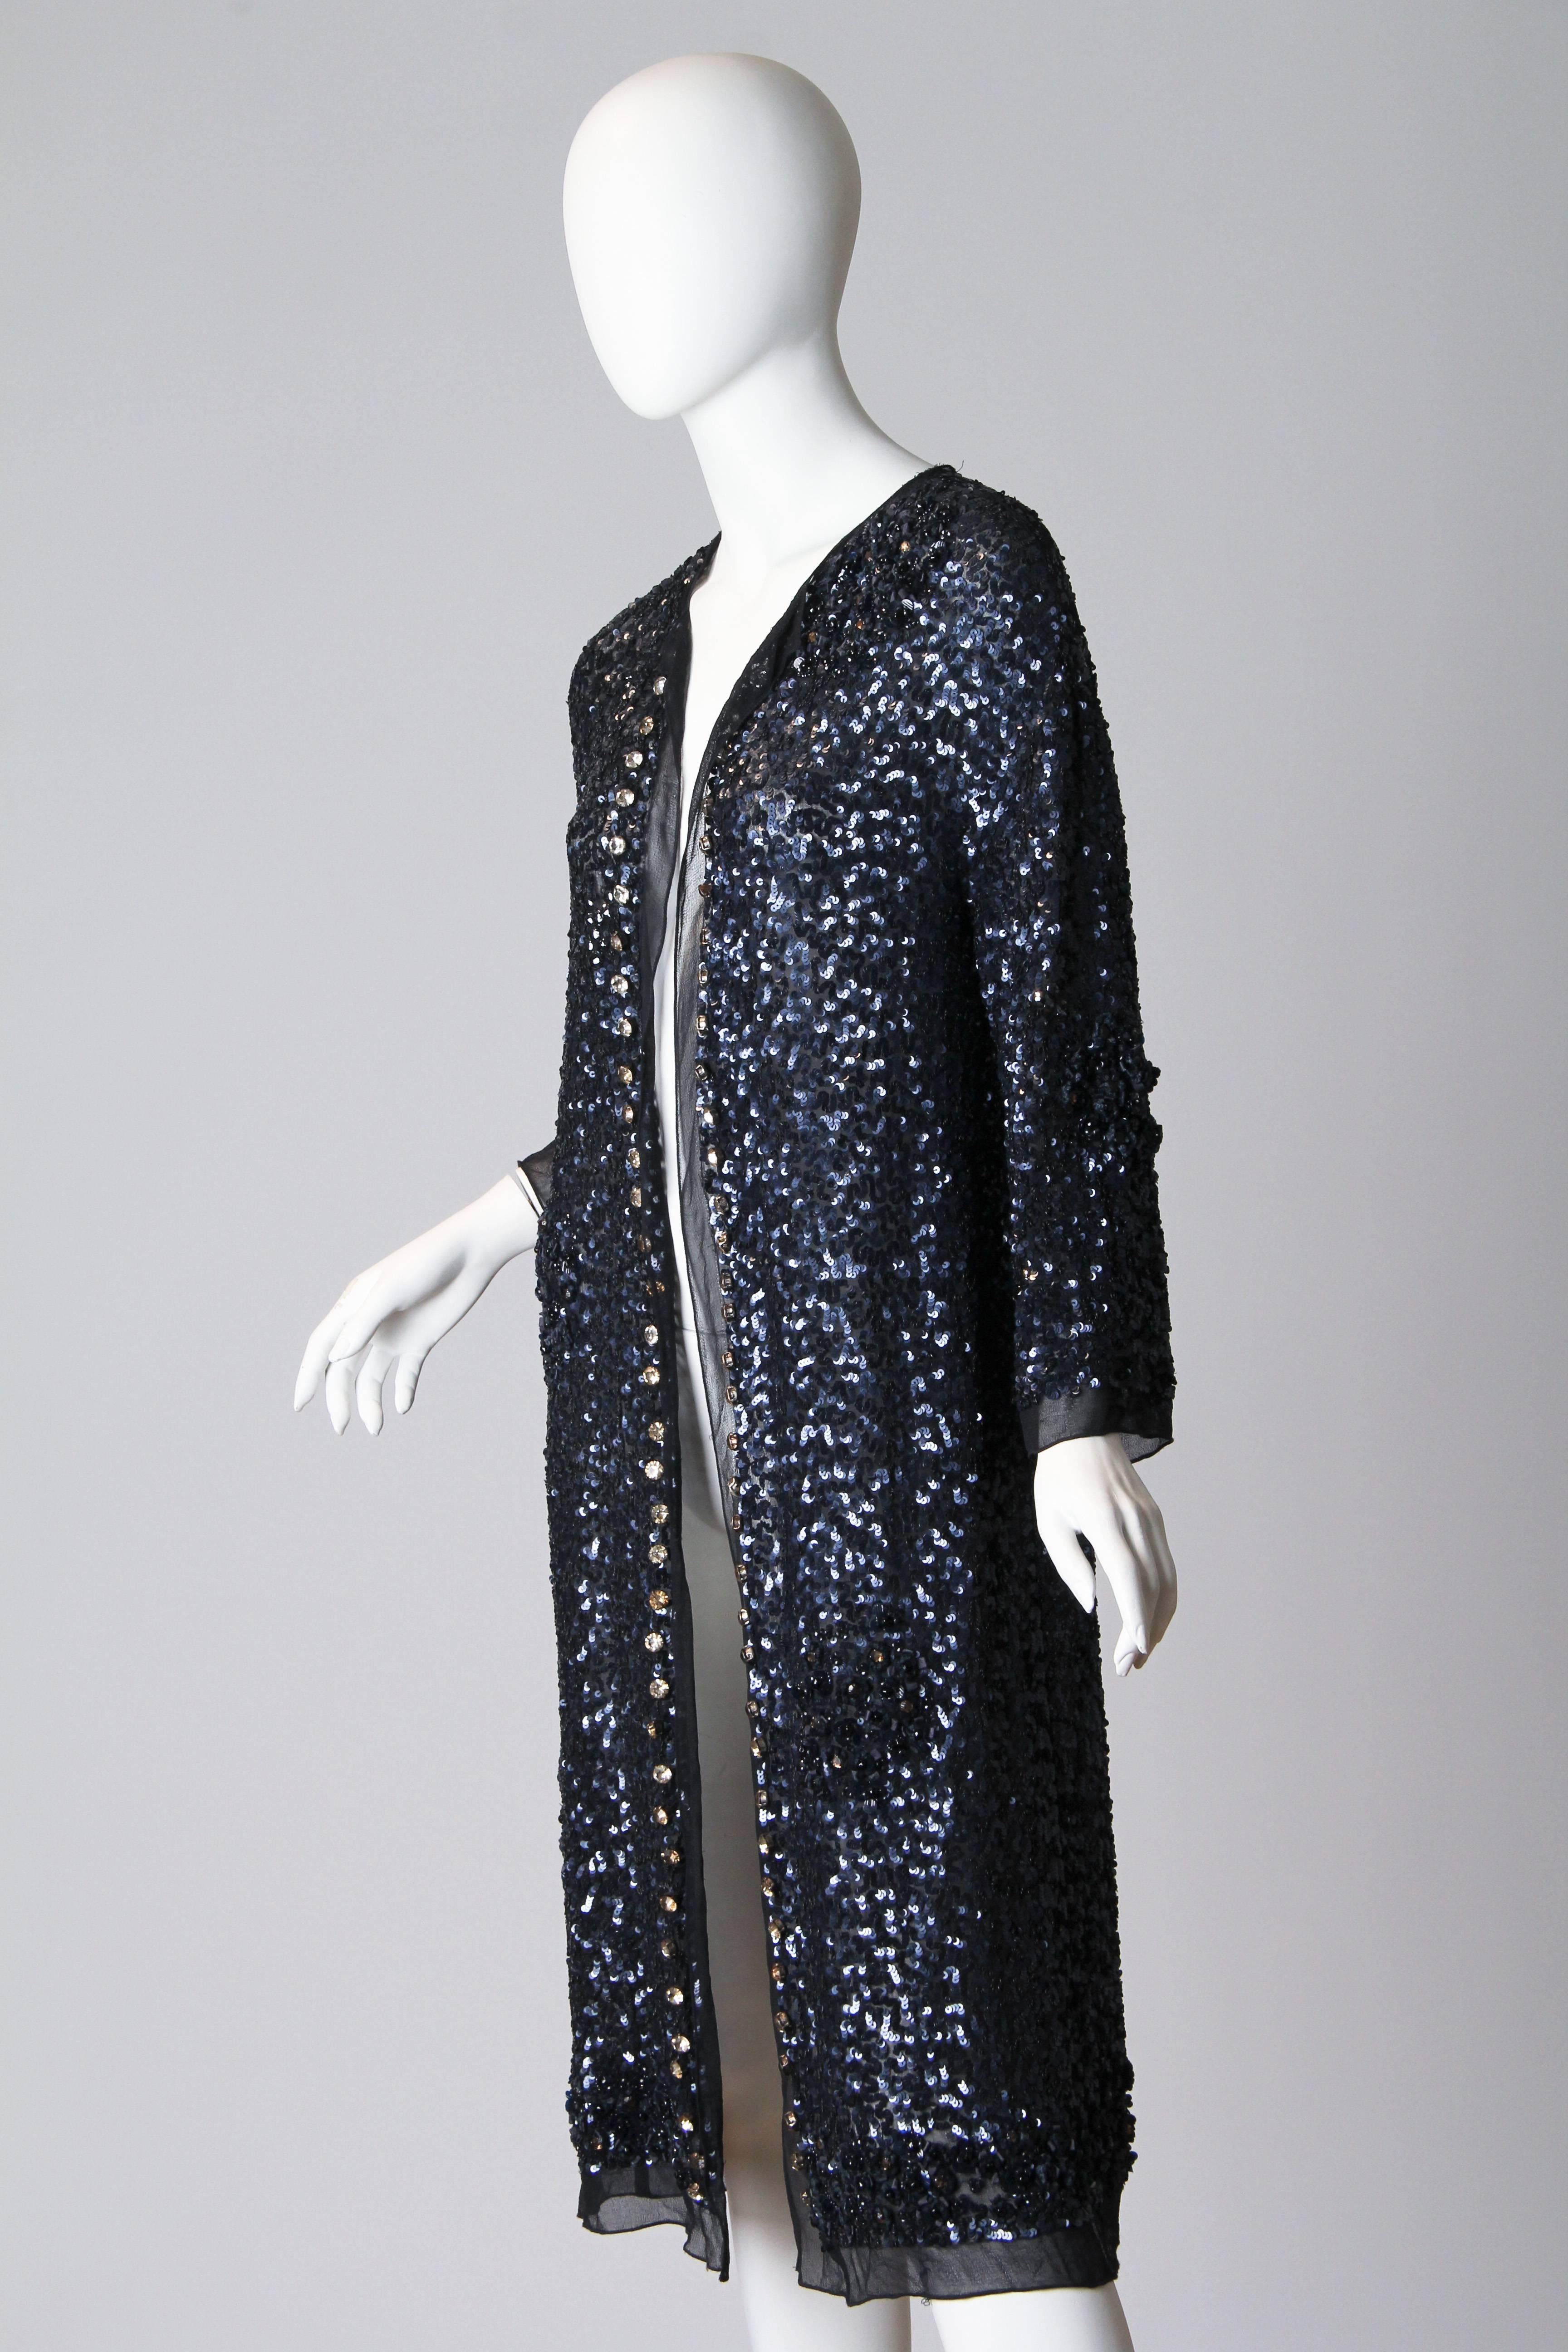 Effortless to wear with loads of glamour we love this beaded jacket. The construction is simple, a single piece of chiffon. The work complex, the entire piece has not only been covered in navy blue sequins, there are also several clusters of flowers